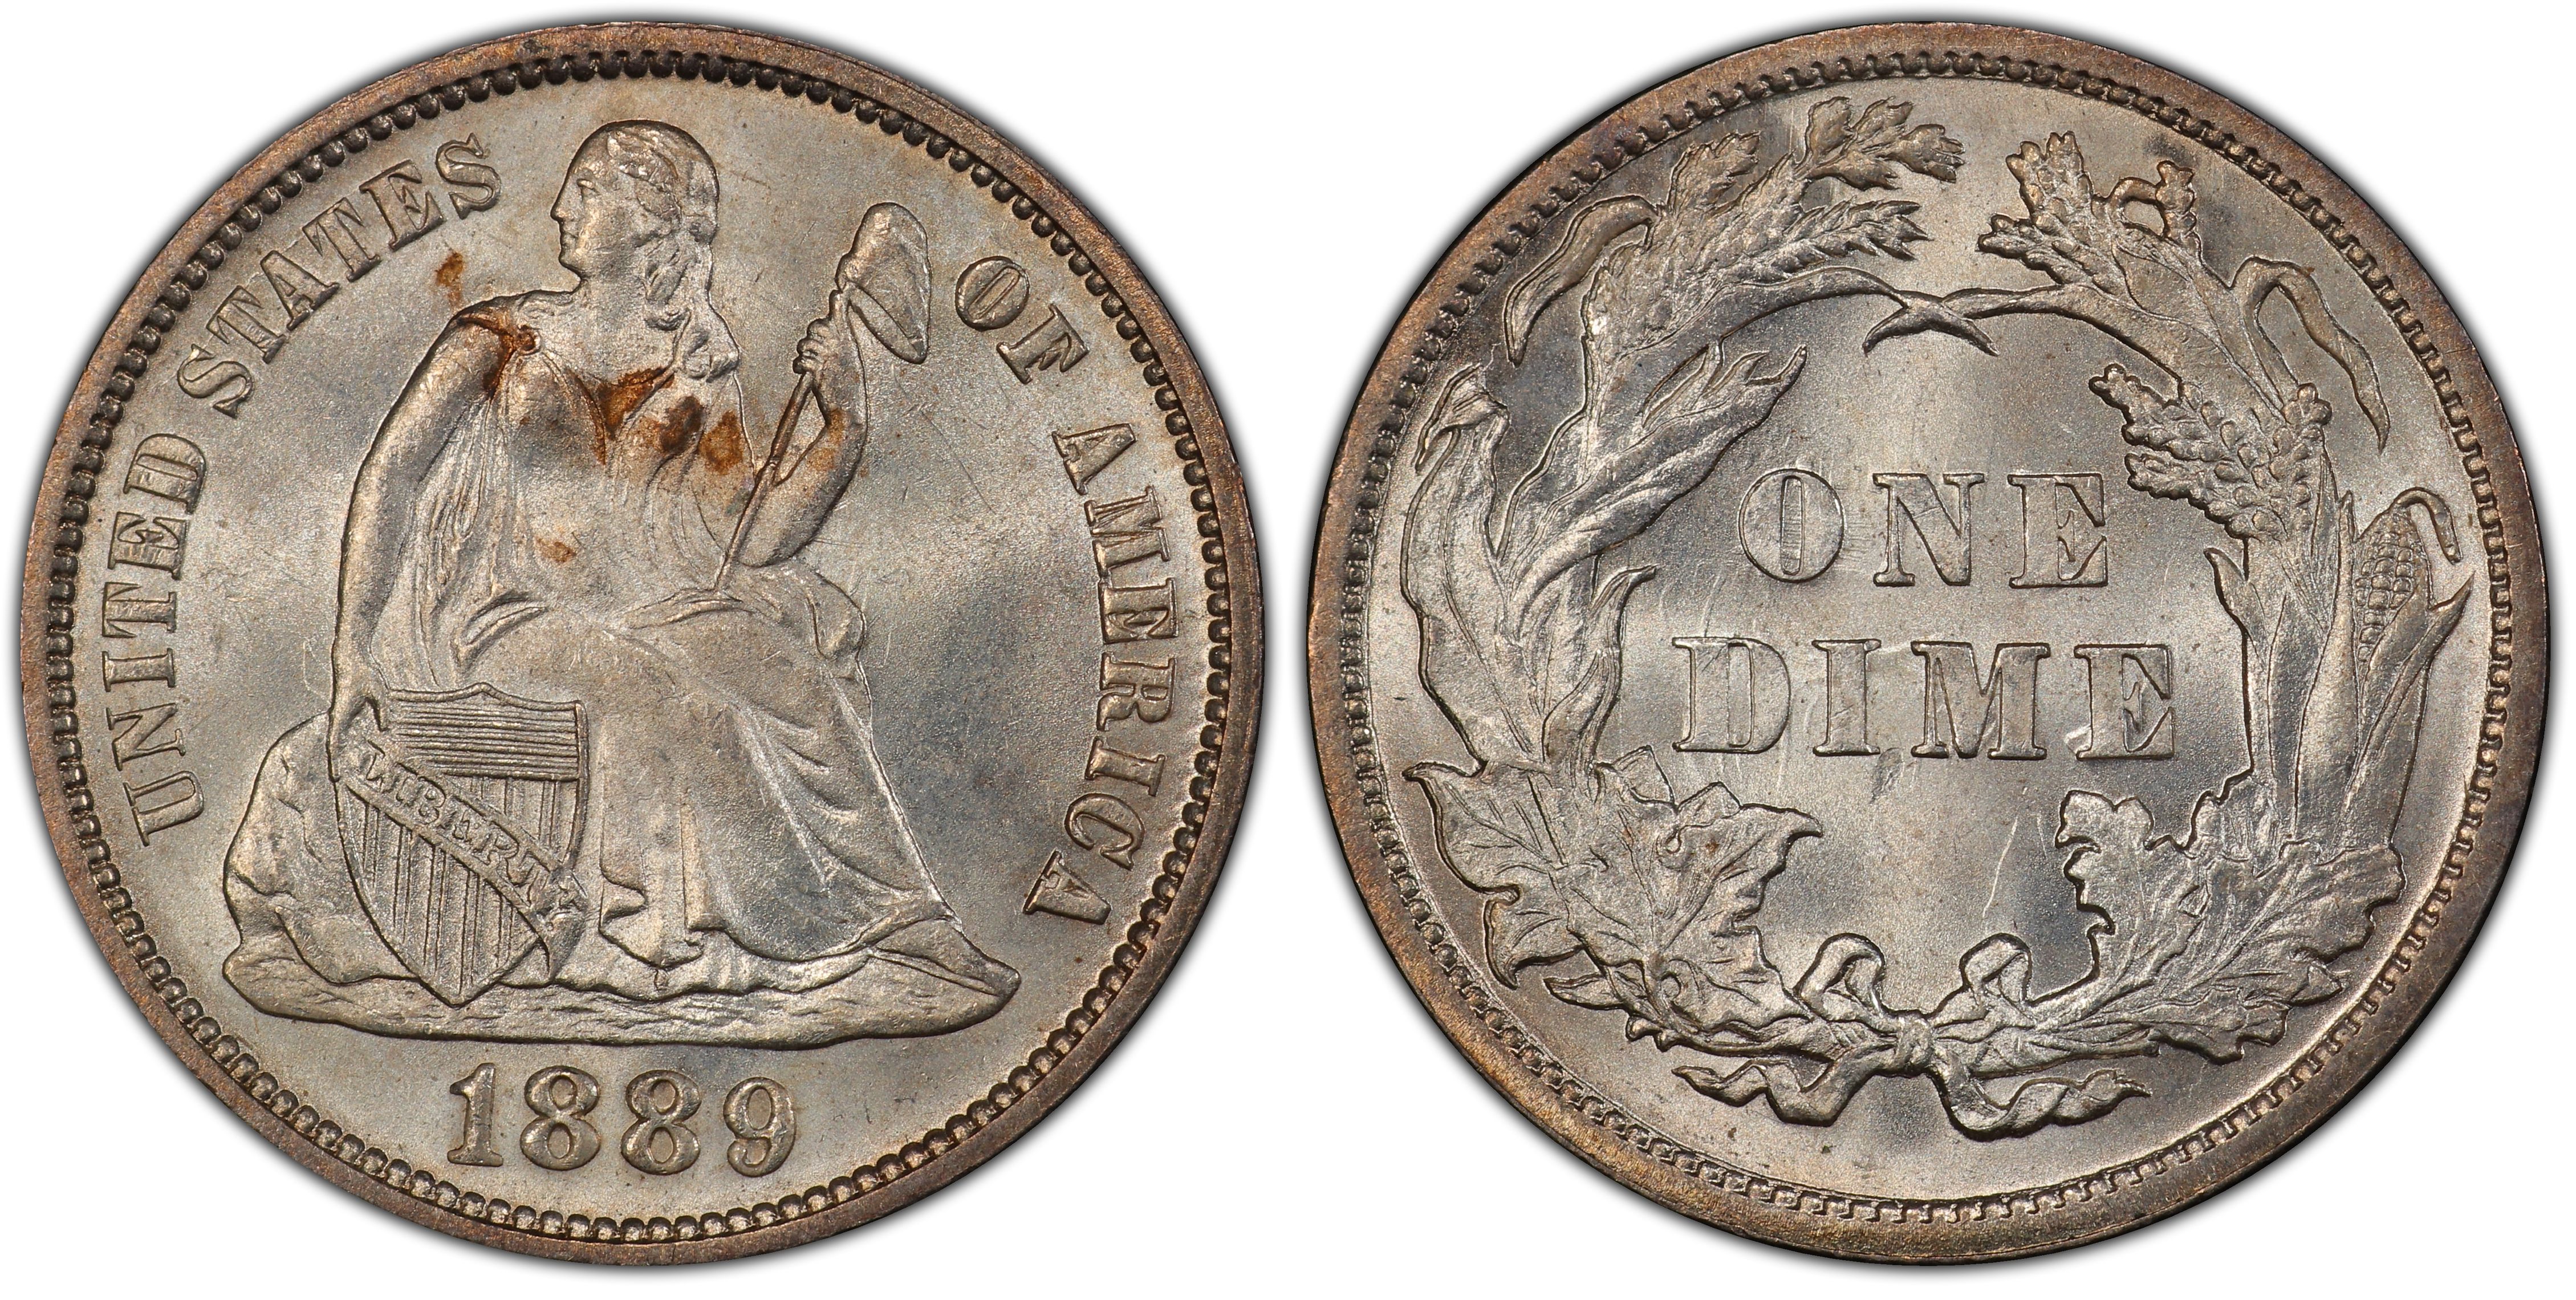 Images of Liberty Seated Dime 1889 10C DDR FS-801 F-106 (005.3) - PCGS